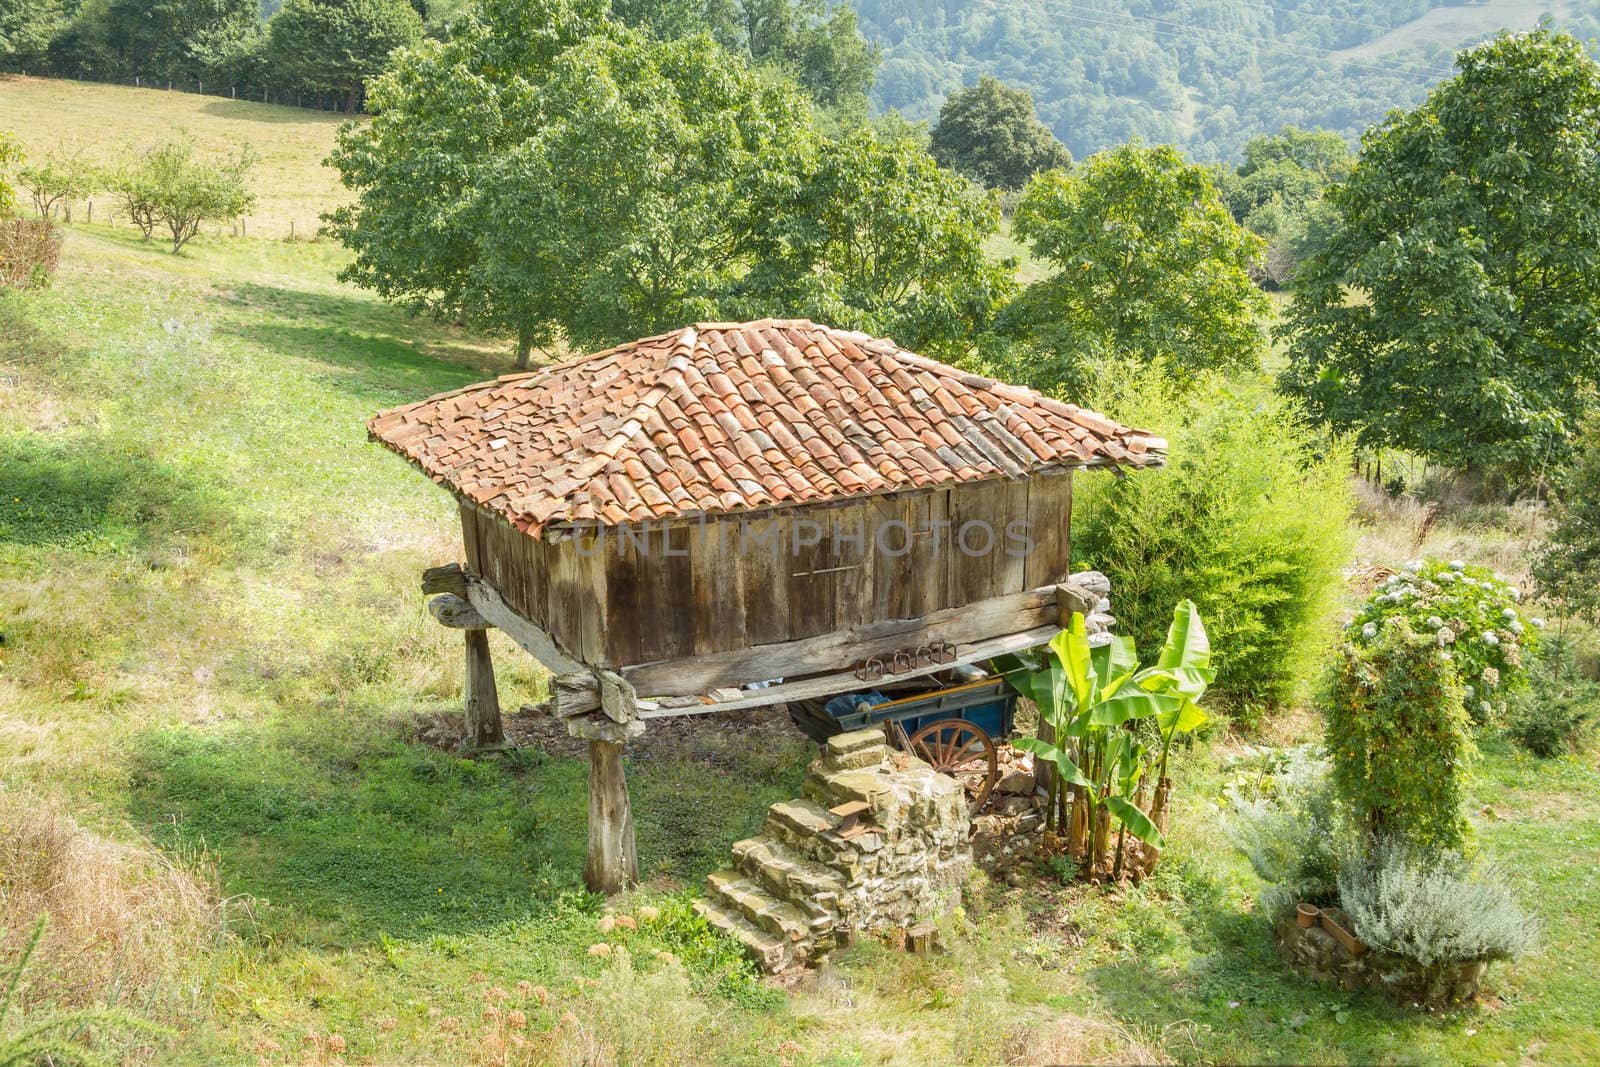 View of typical granary of Asturias, in Spain, raised by stone pillars and known as "horreo"